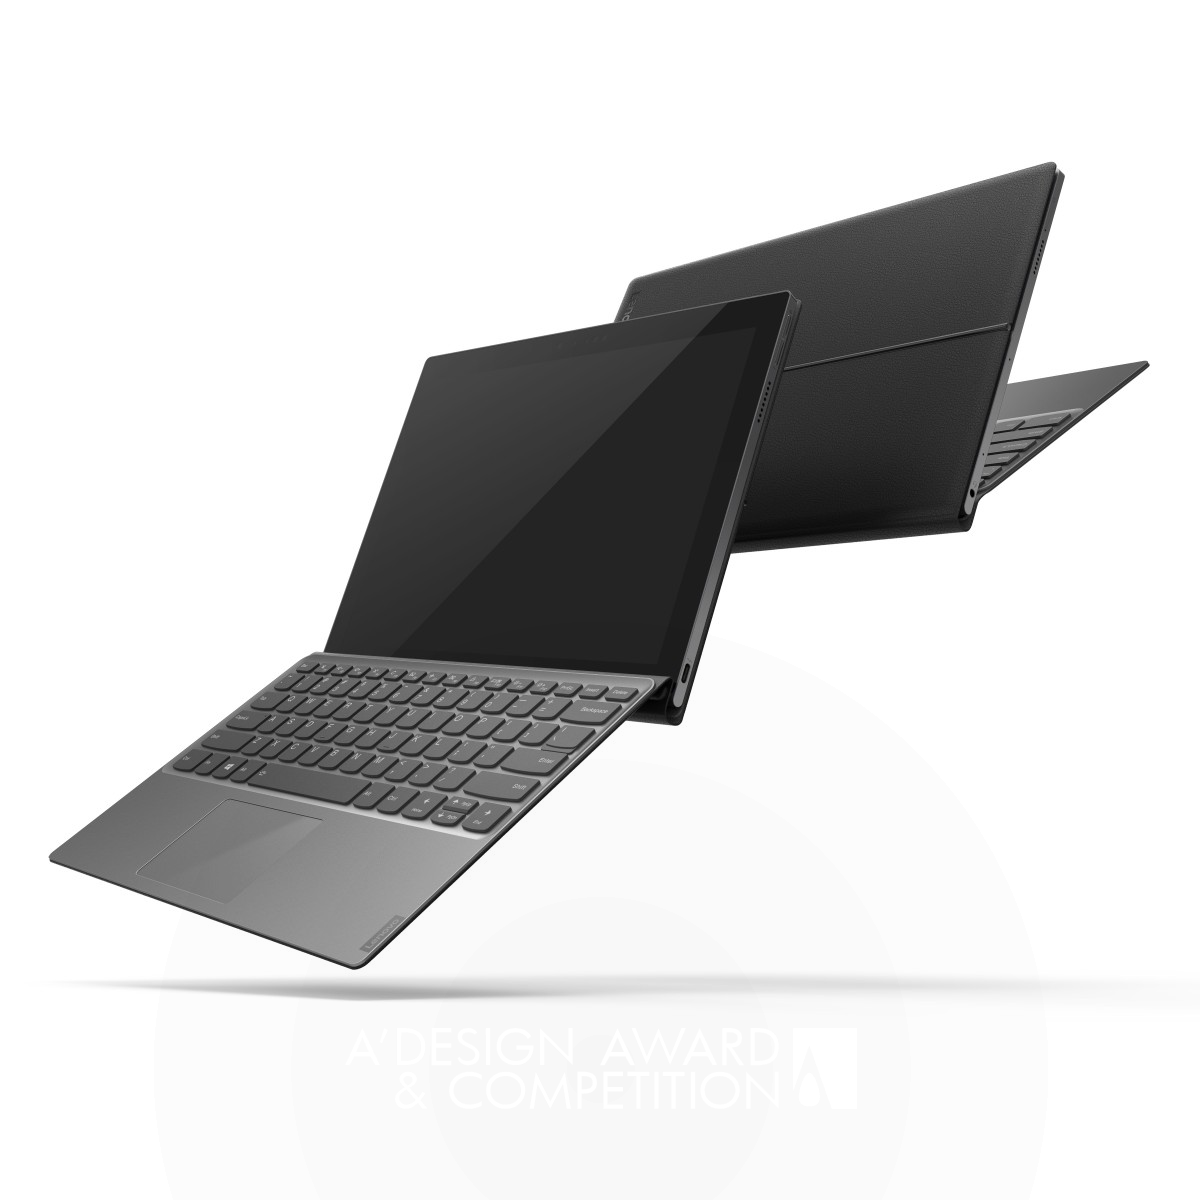 Experience Design Group, Lenovo's Miix 630 Rossion: A Revolution in Laptop Design